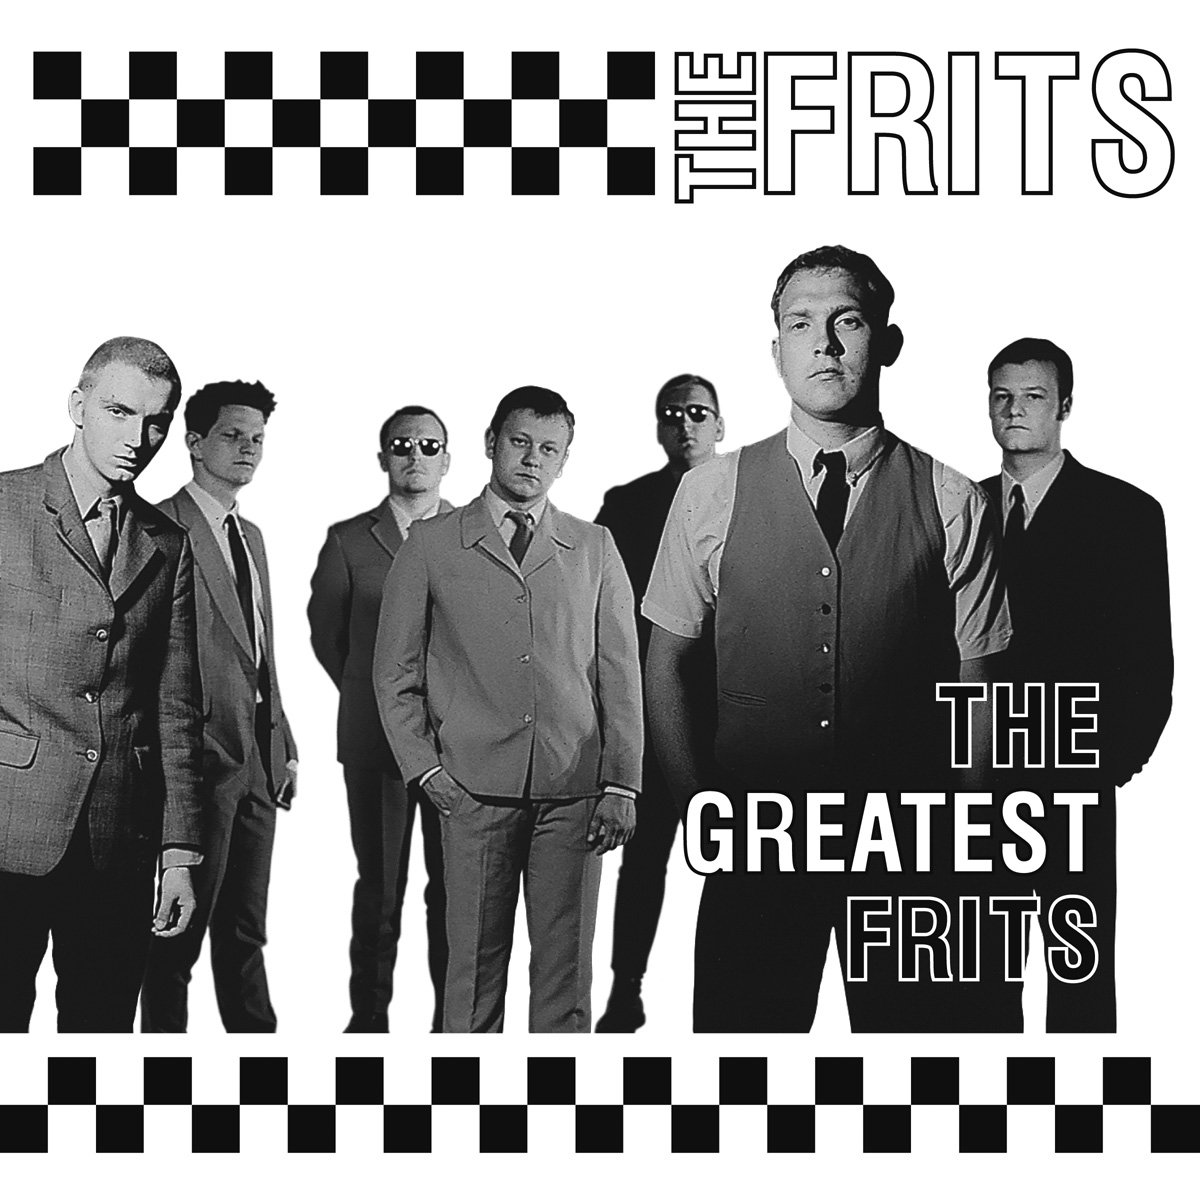 THE FRITS - neues Album THE GREATEST FRITS Release am 22. Januar 2016